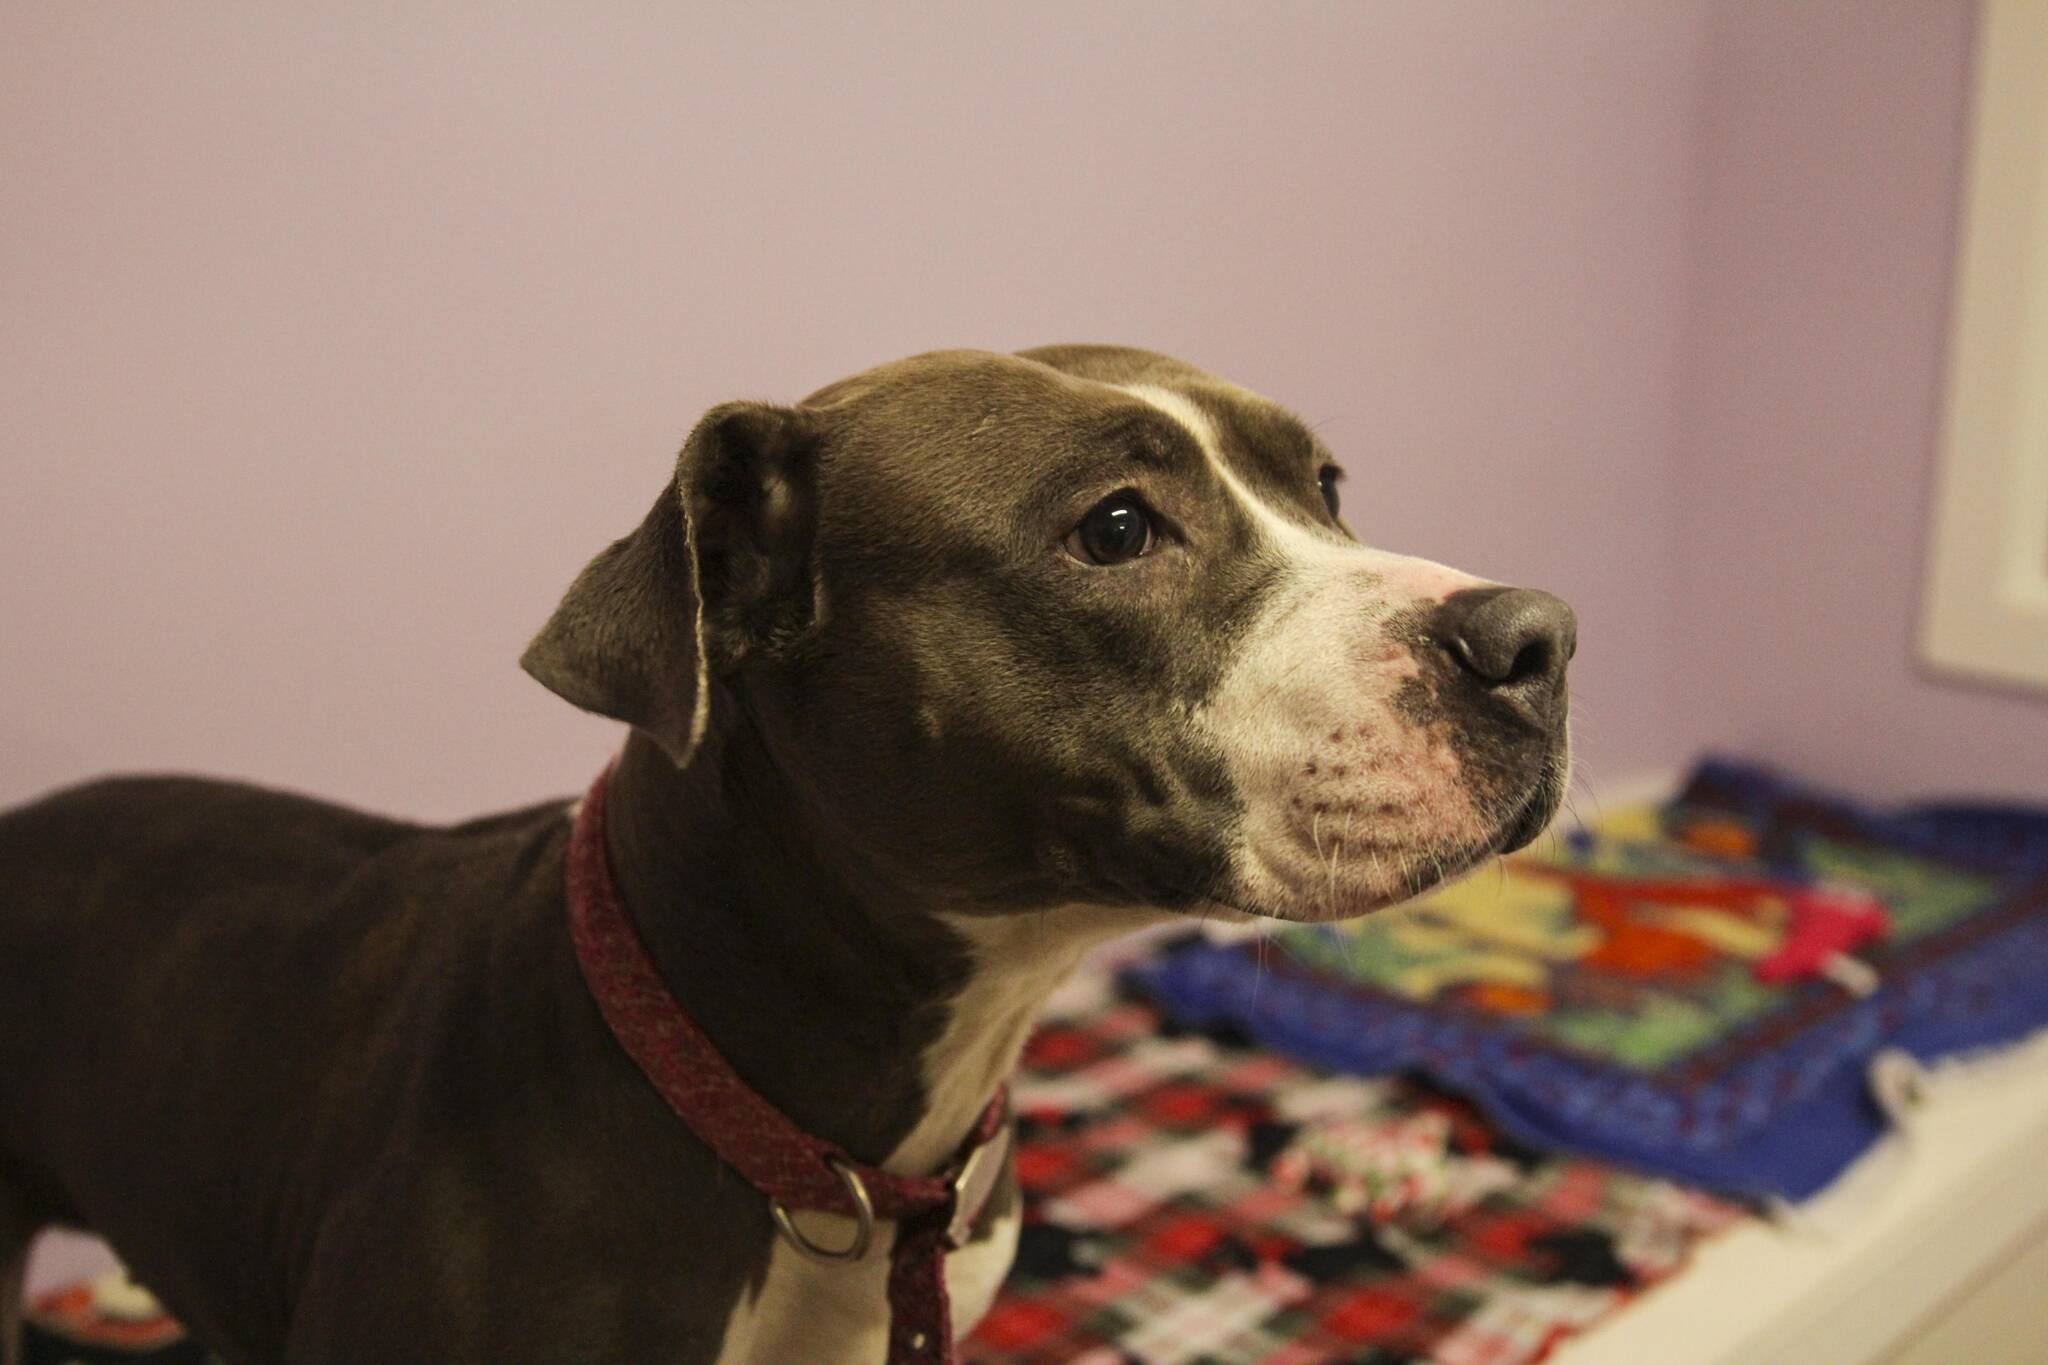 Lady, a pit bull mix, is one of many animals currently residing at Juneau Animal Rescue, which recently received a large legacy gift from a Juneau resident. (Michael S. Lockett / Juneau Empire)